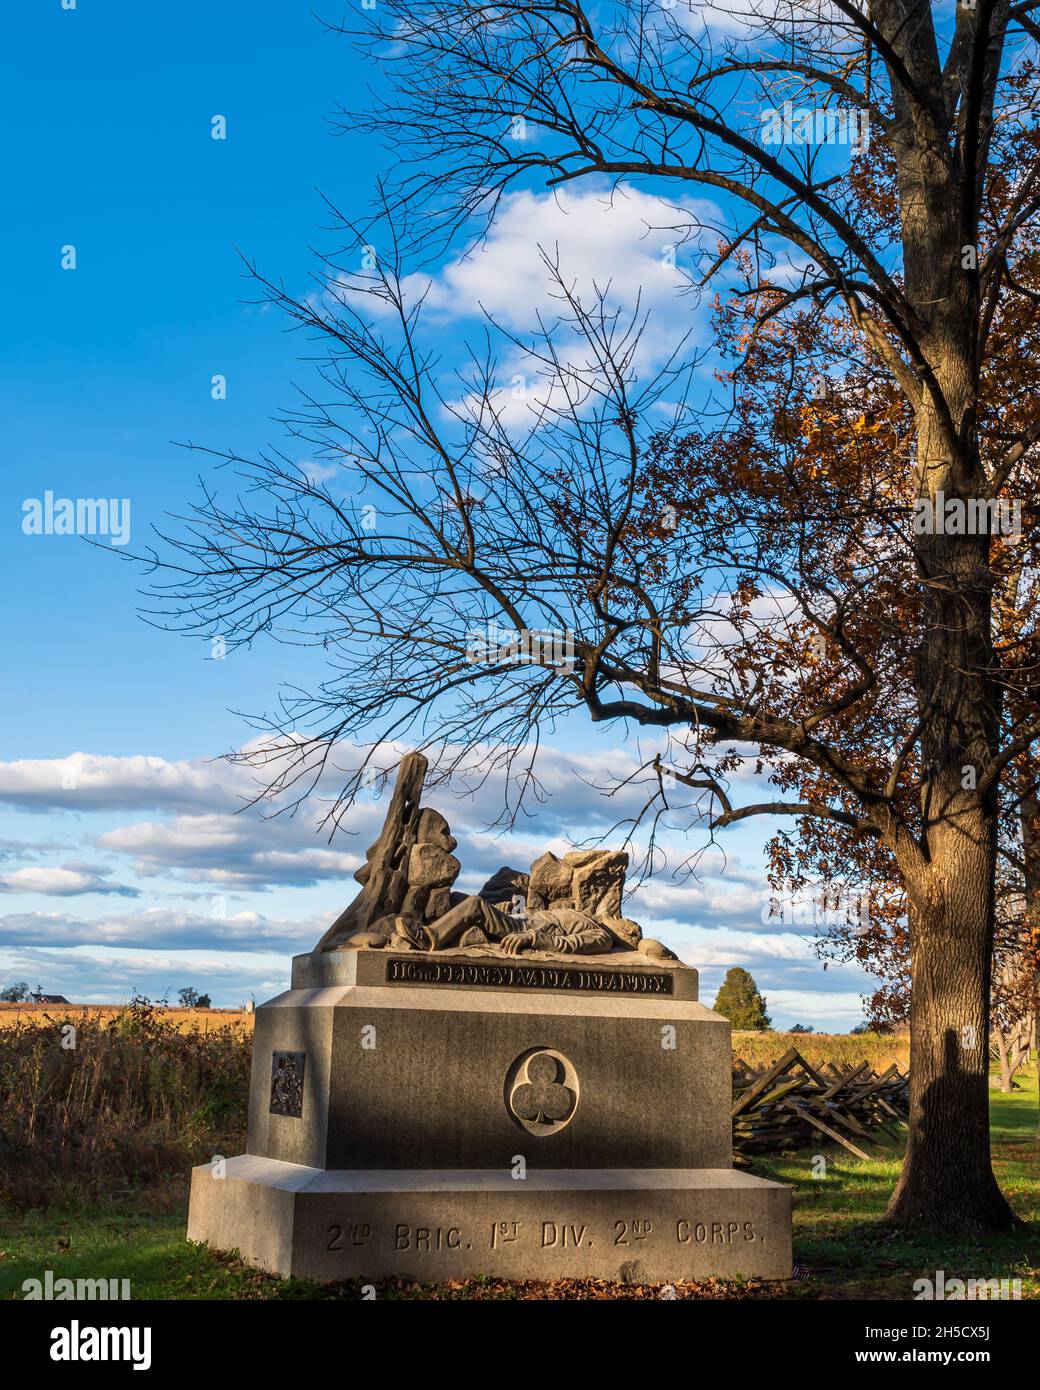 The 116th Pennsylvania Volunteer Infantry Regiment Monument on Sickles Avenue at the Gettysburg National Military Park in Gettysburg, Pennsylvania, US Stock Photo